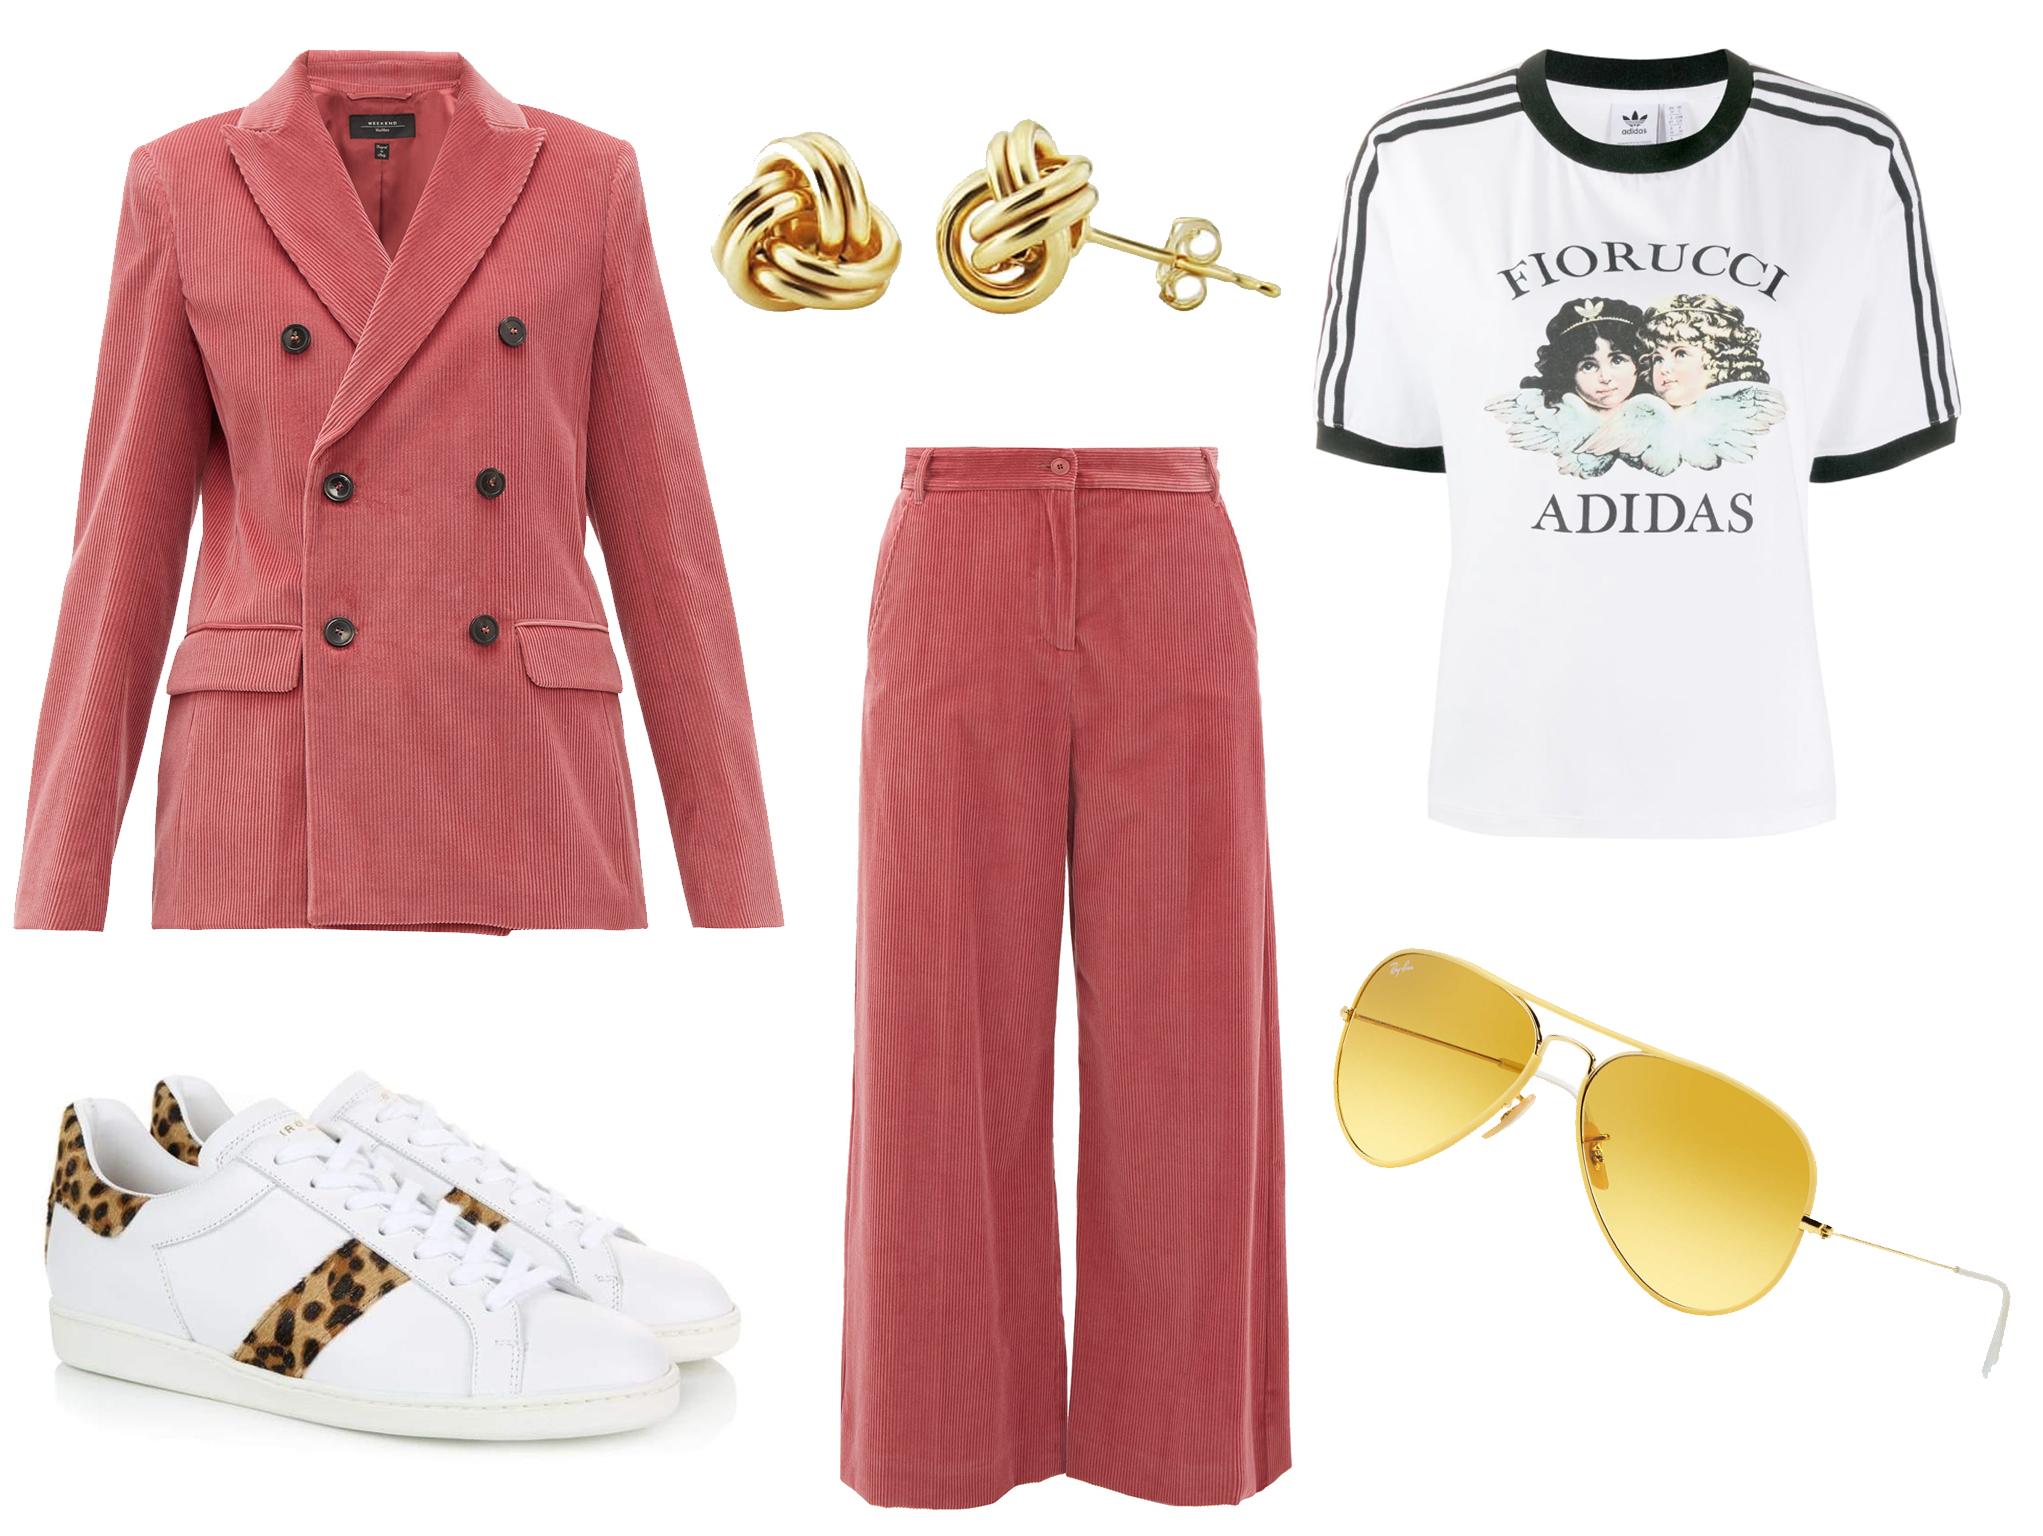 Weekend MaxMara Ometto blazer: £315, Air &amp; Grace Copeland white and leopard print trainers: £159, Auree Jewellery gold vermeil double knot study earrings: £68, Weekend MaxMara Padre trousers: £170, Urban Outfitters adidas Originals by Fiorucci three-stripes T-shirt: £38. Ray-Ban aviator: £153.